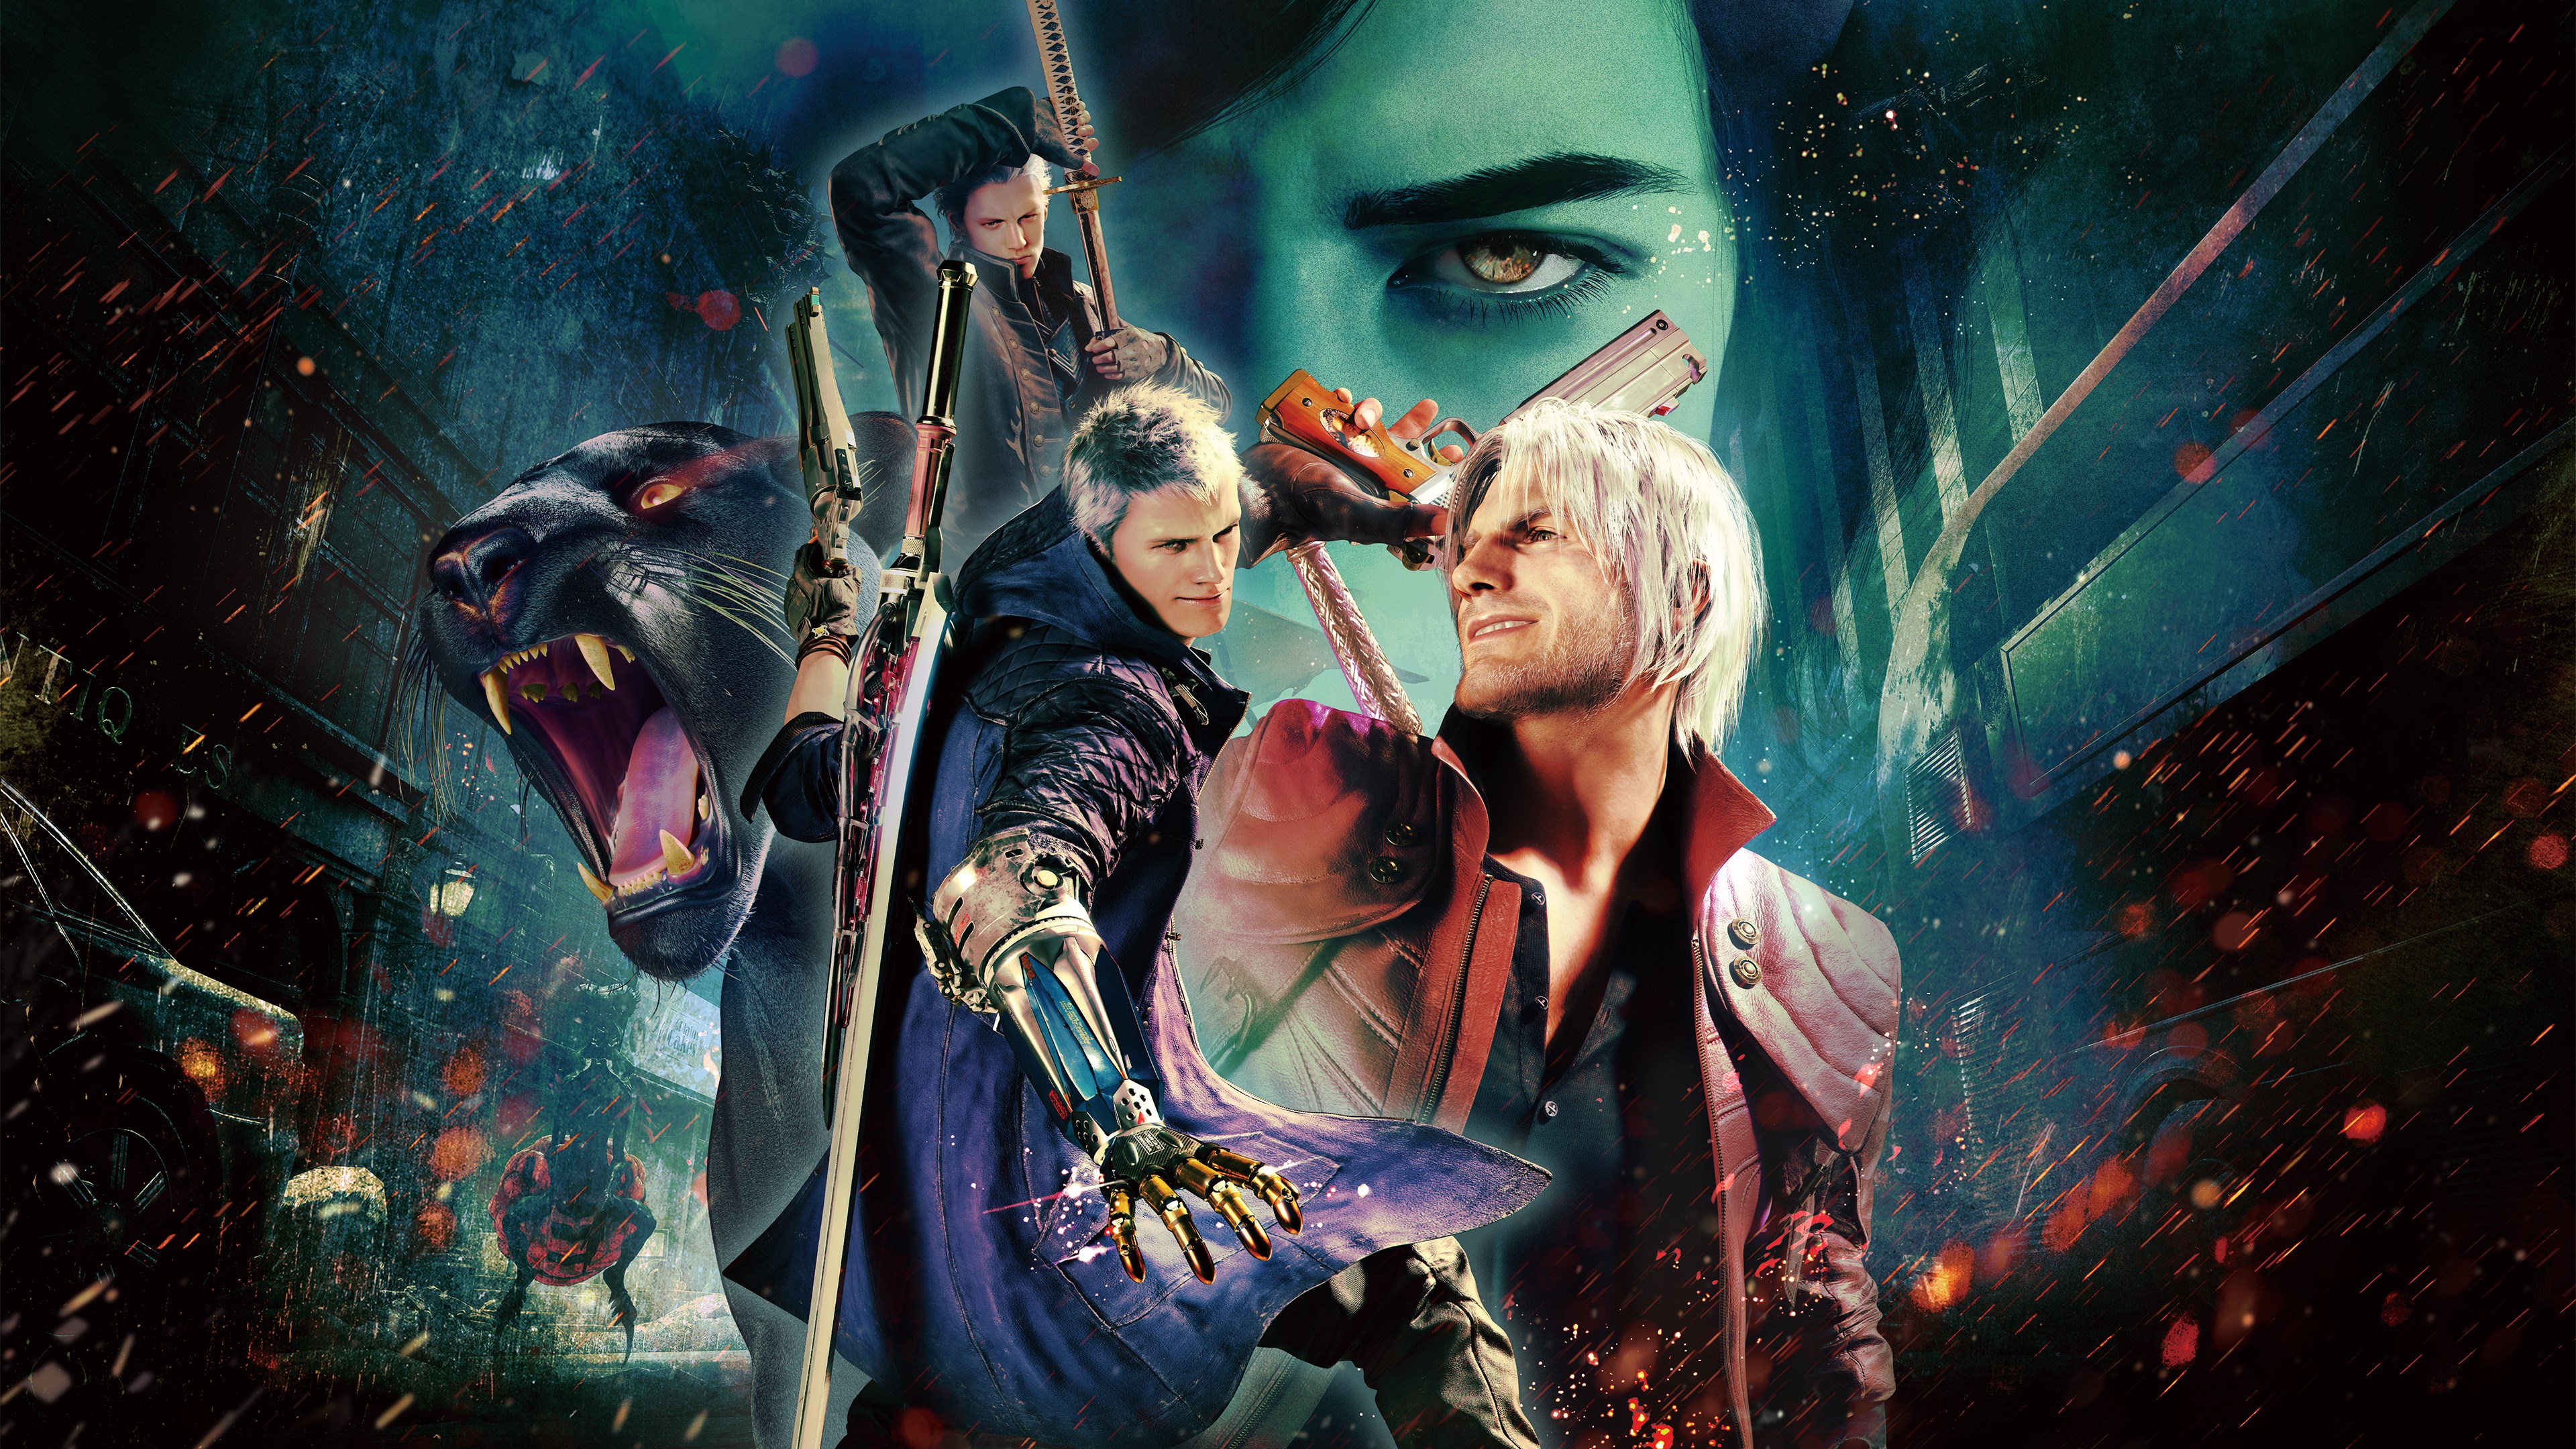 devil may cry 5 xbox one